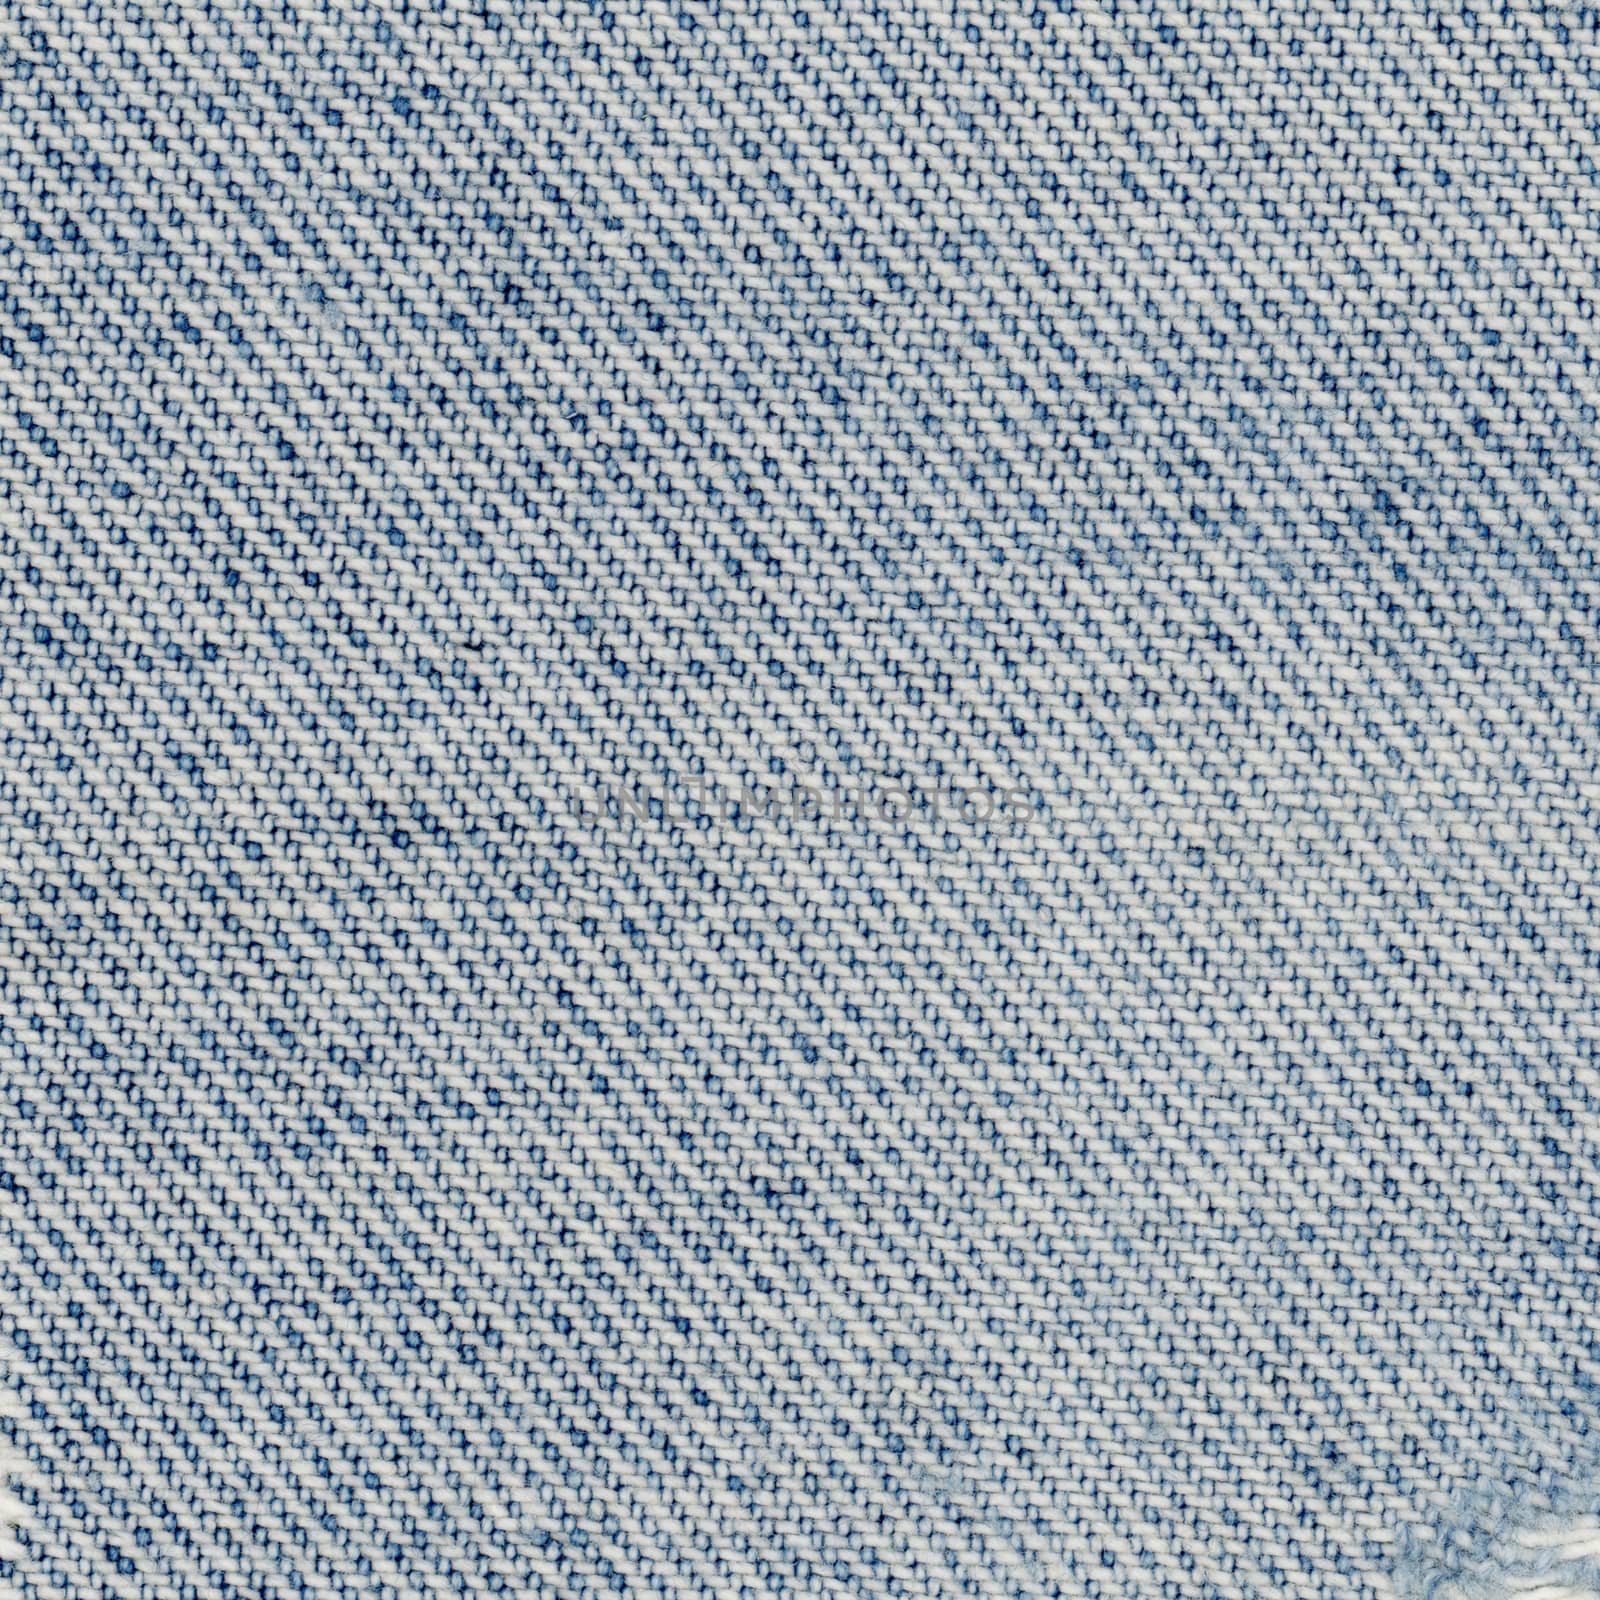 blue jeans fabric texture background by claudiodivizia